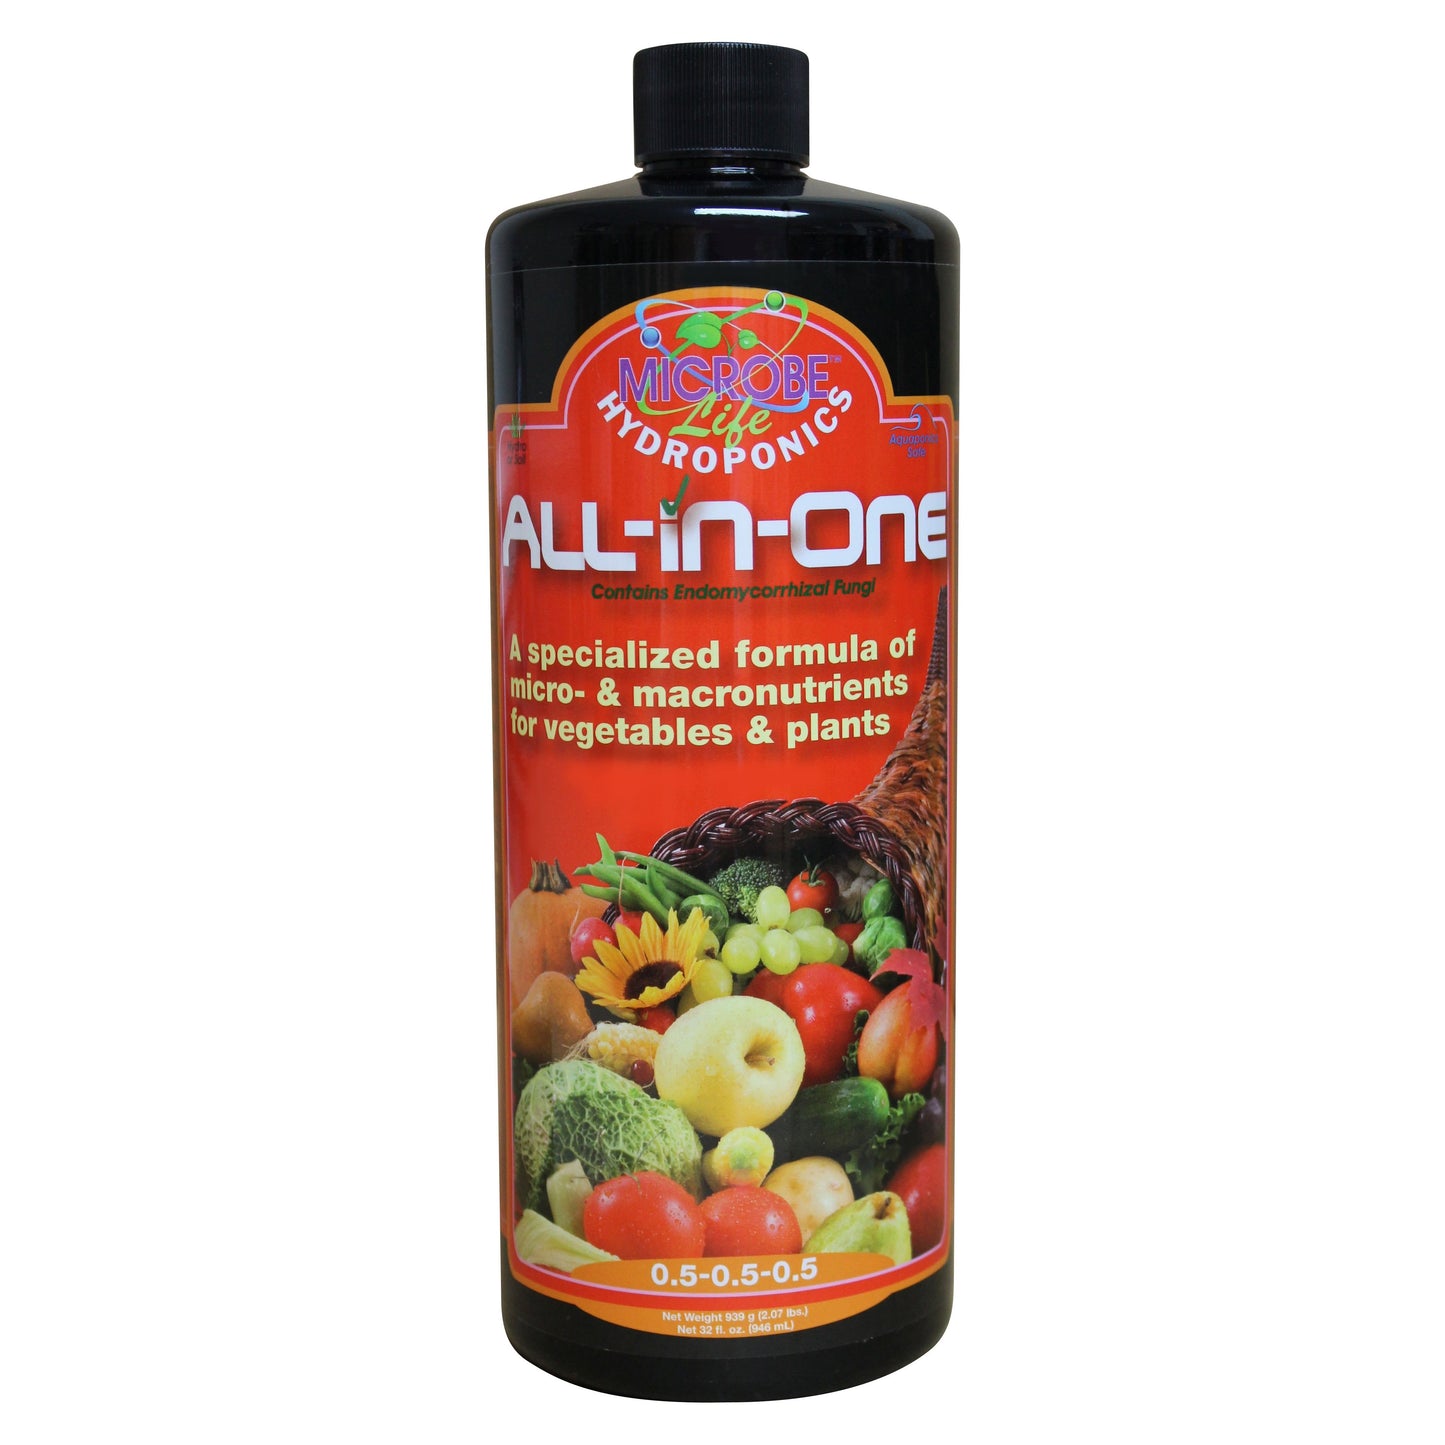 All-In-One by Microbe Life Hydroponics, 32 oz.